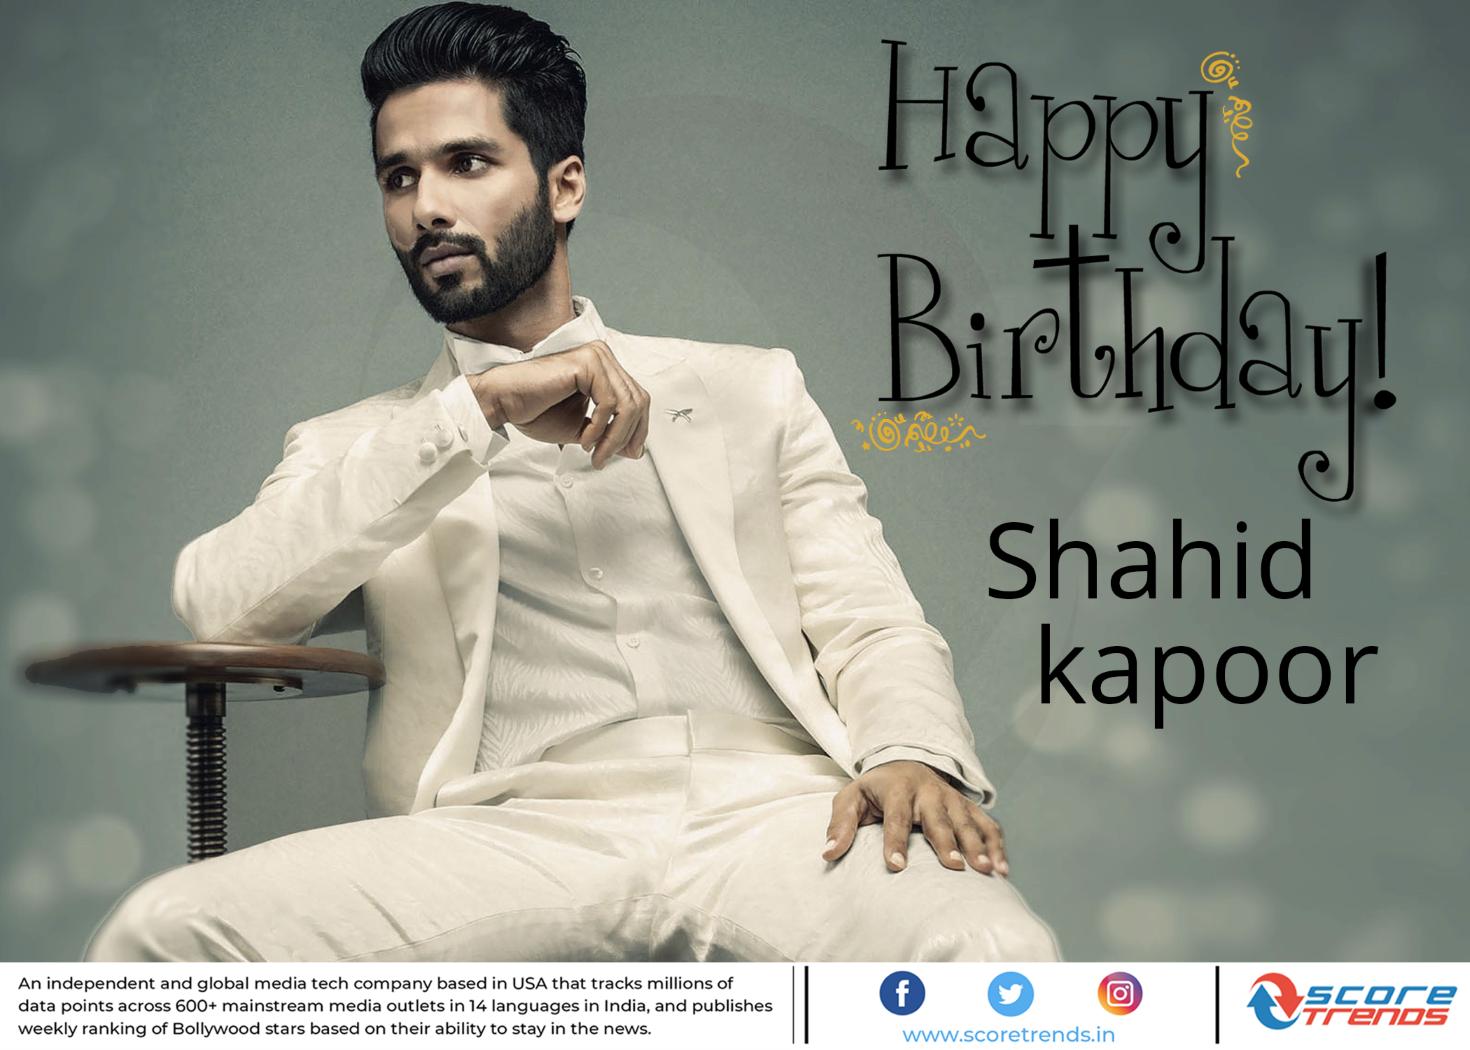 Score Trends wishes Shahid Kapoor a Happy Birthday!! 